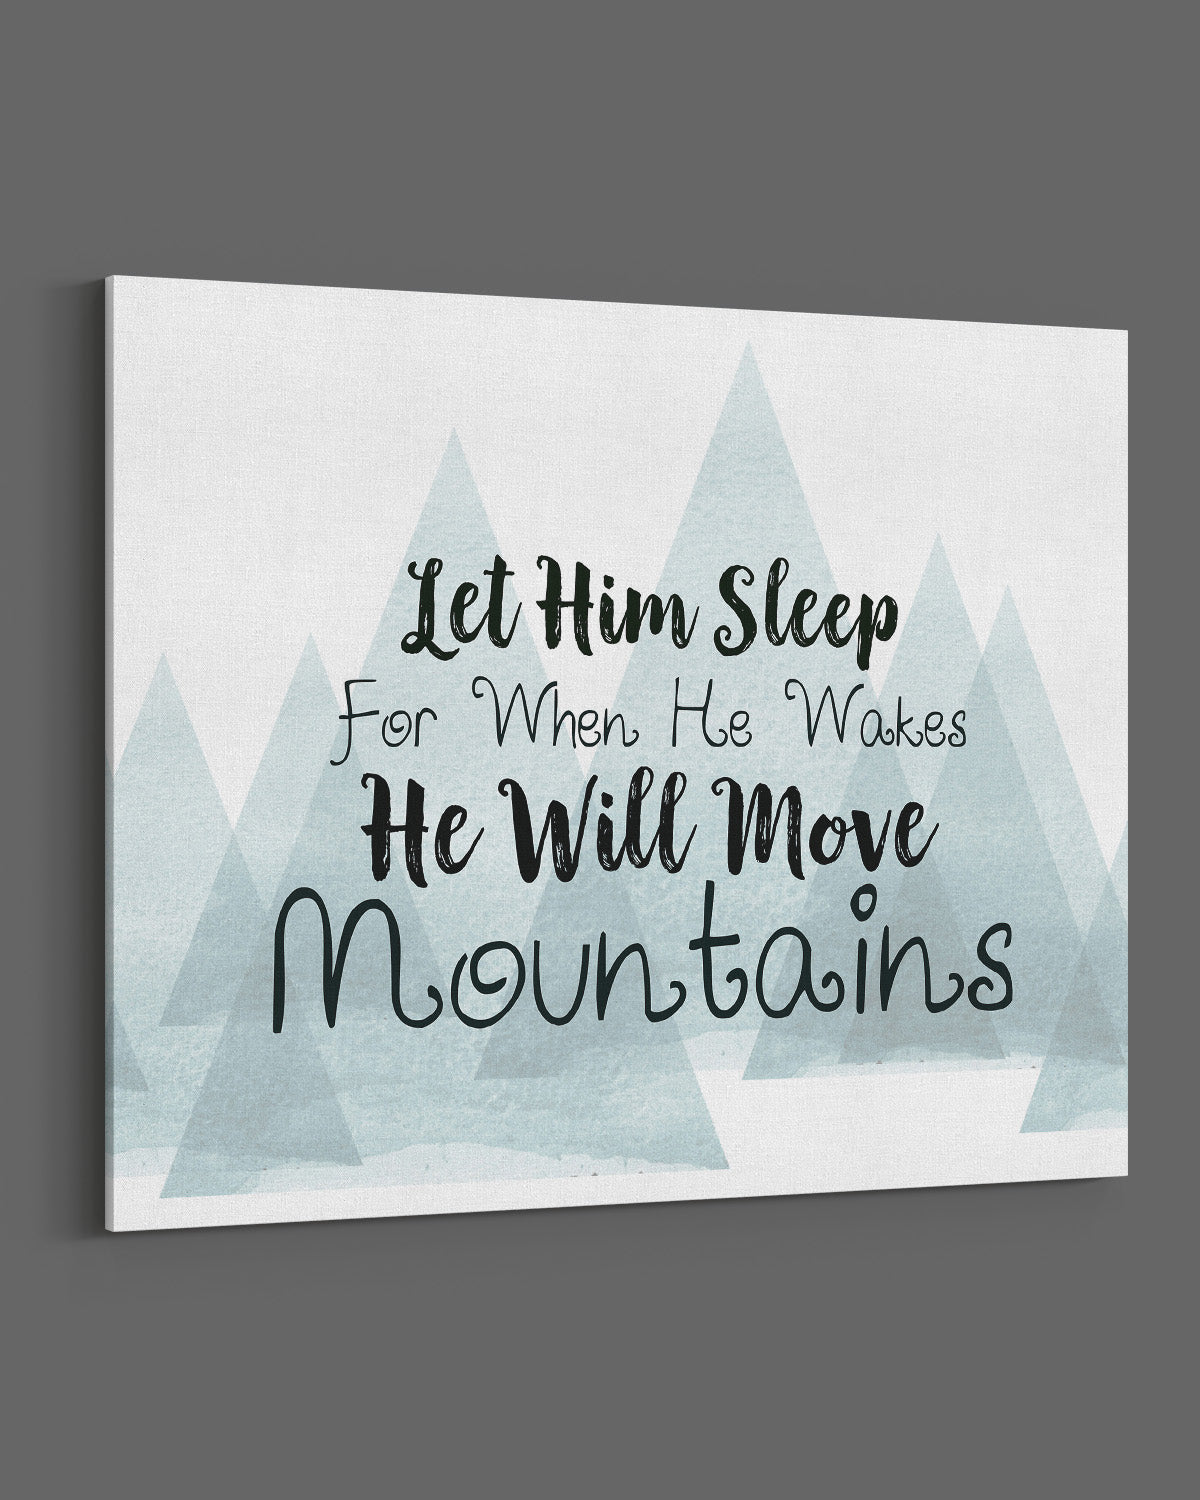 Govivo Let Him Sleep For When He Wakes He Will Move Mountains - Kids Bedroom Decor for Boys - Above Crib Decor - Nursery Wall Decorations - Motivational Quote for Boys